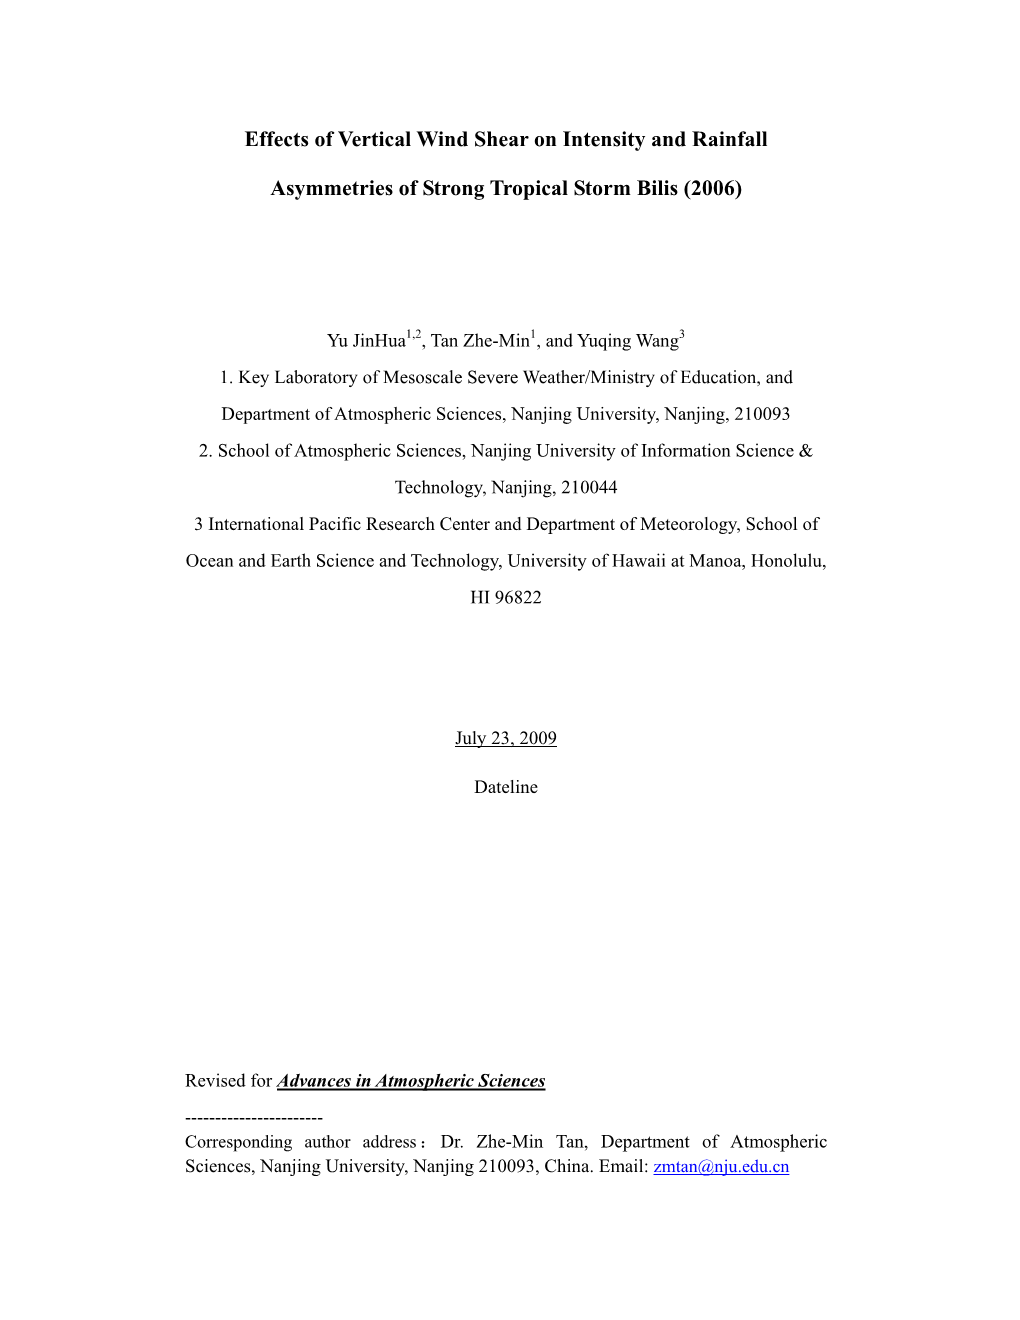 Effects of Vertical Wind Shear on Intensity and Rainfall Asymmetries